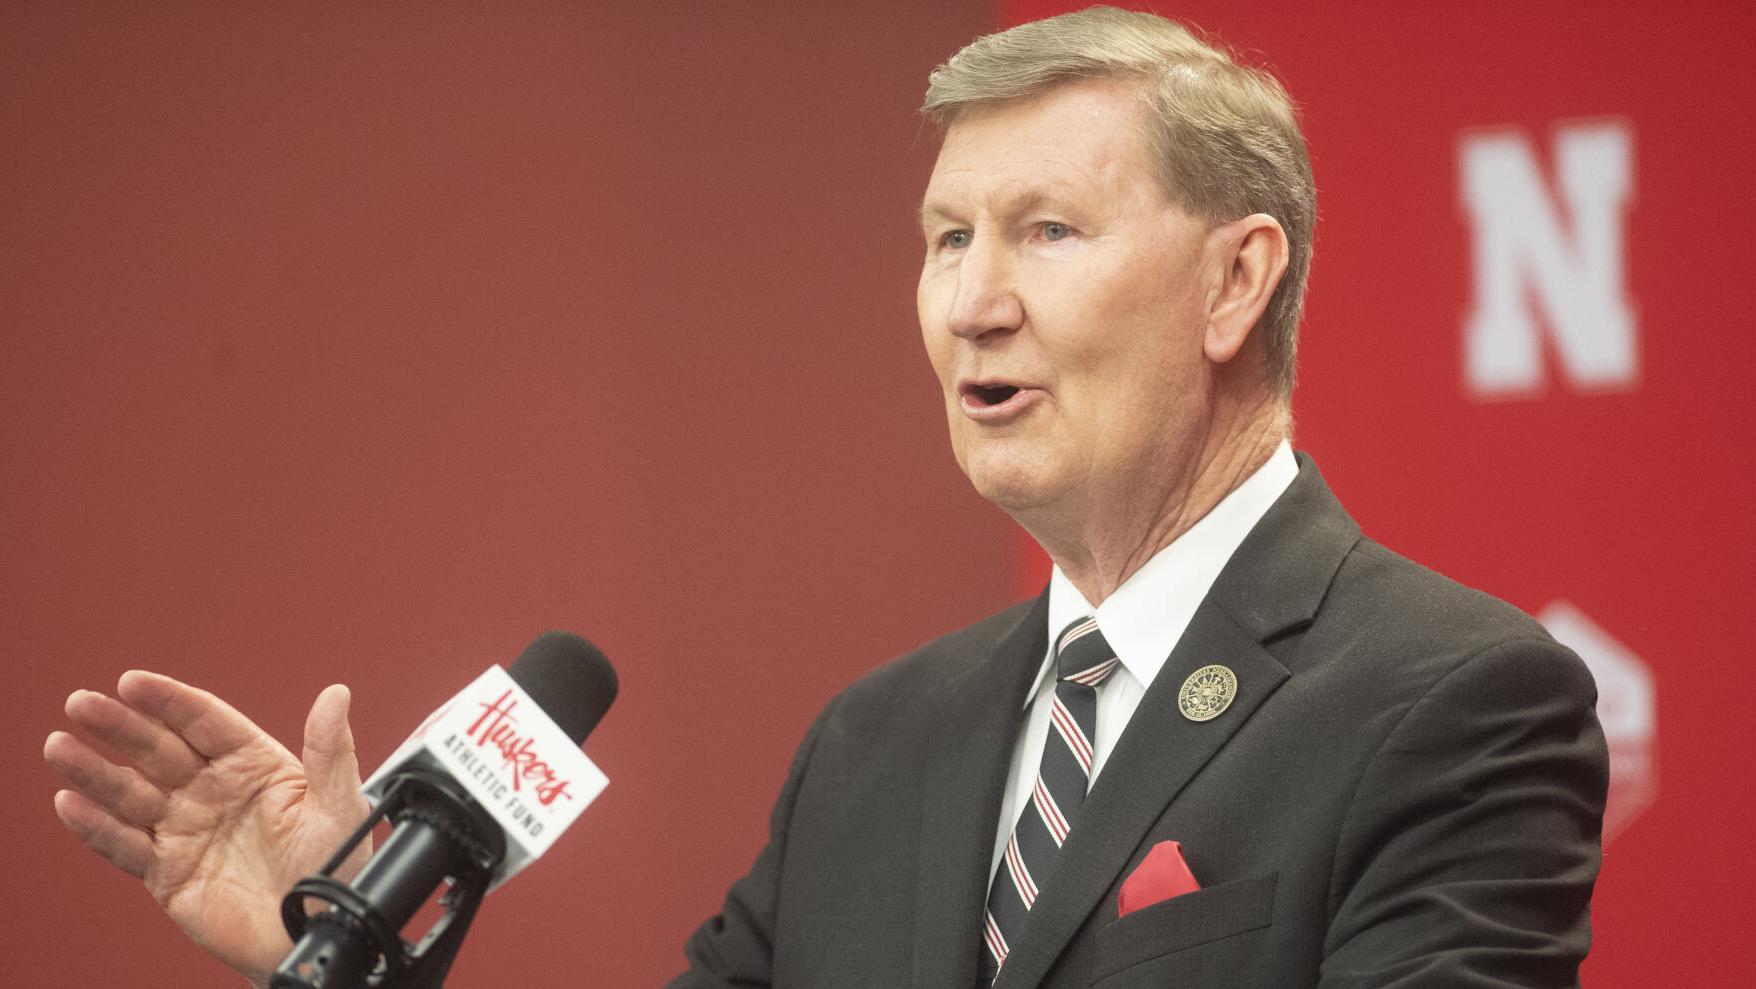 Regents to consider bonus for Carter; NU president says he'll donate to charity